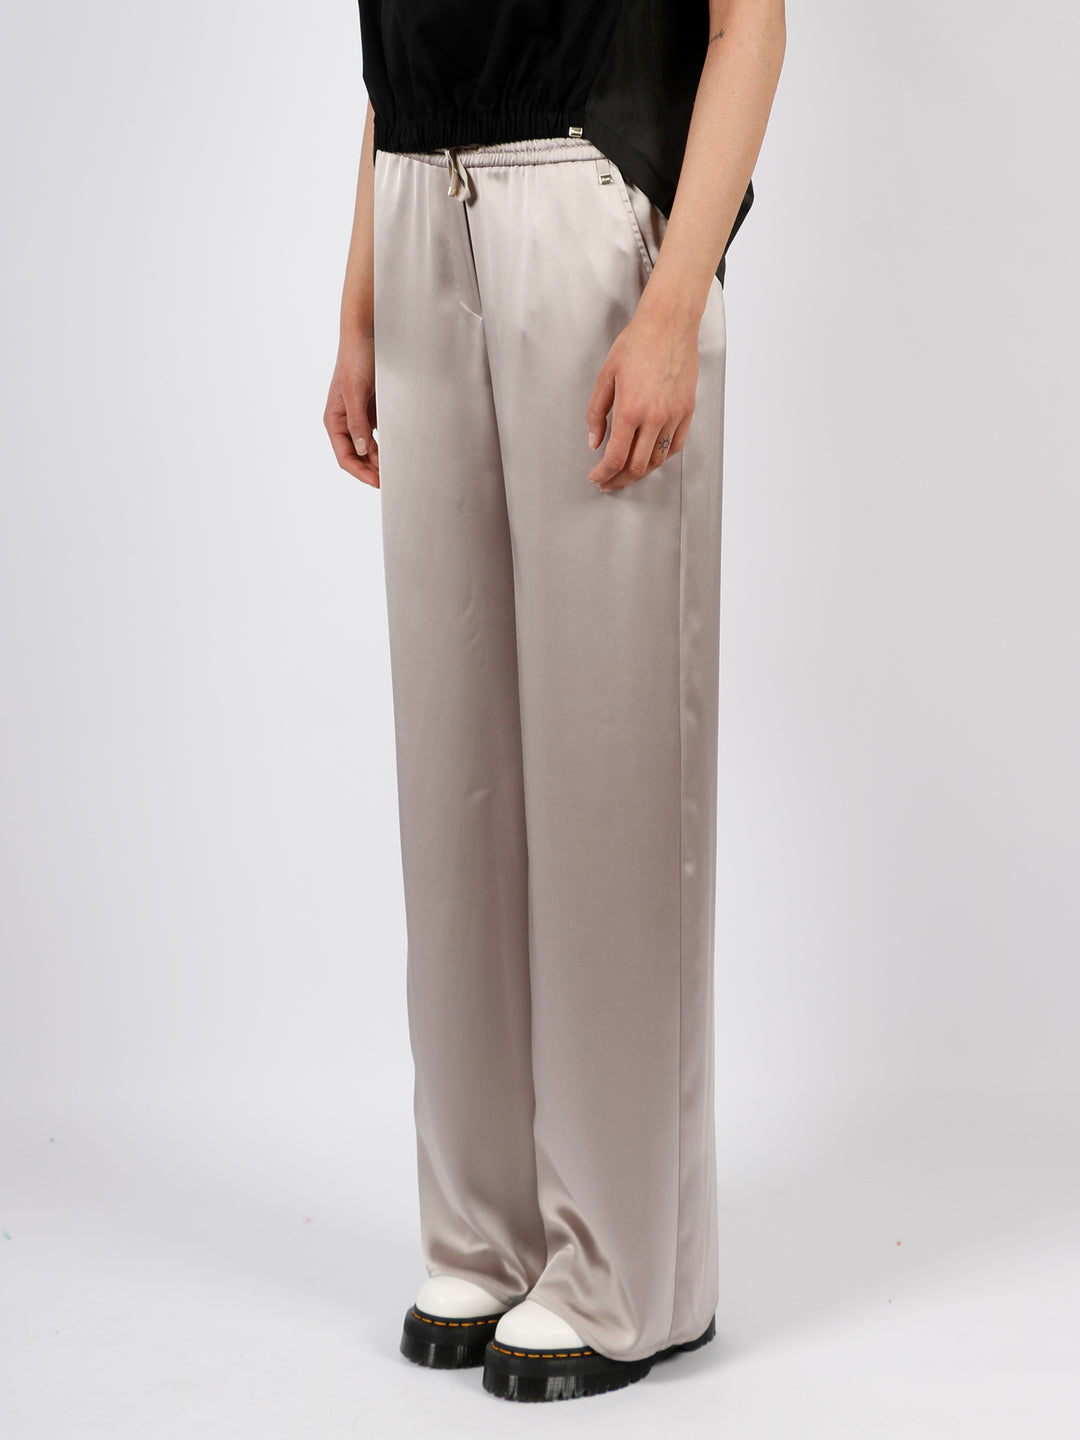 Casual satin trousers